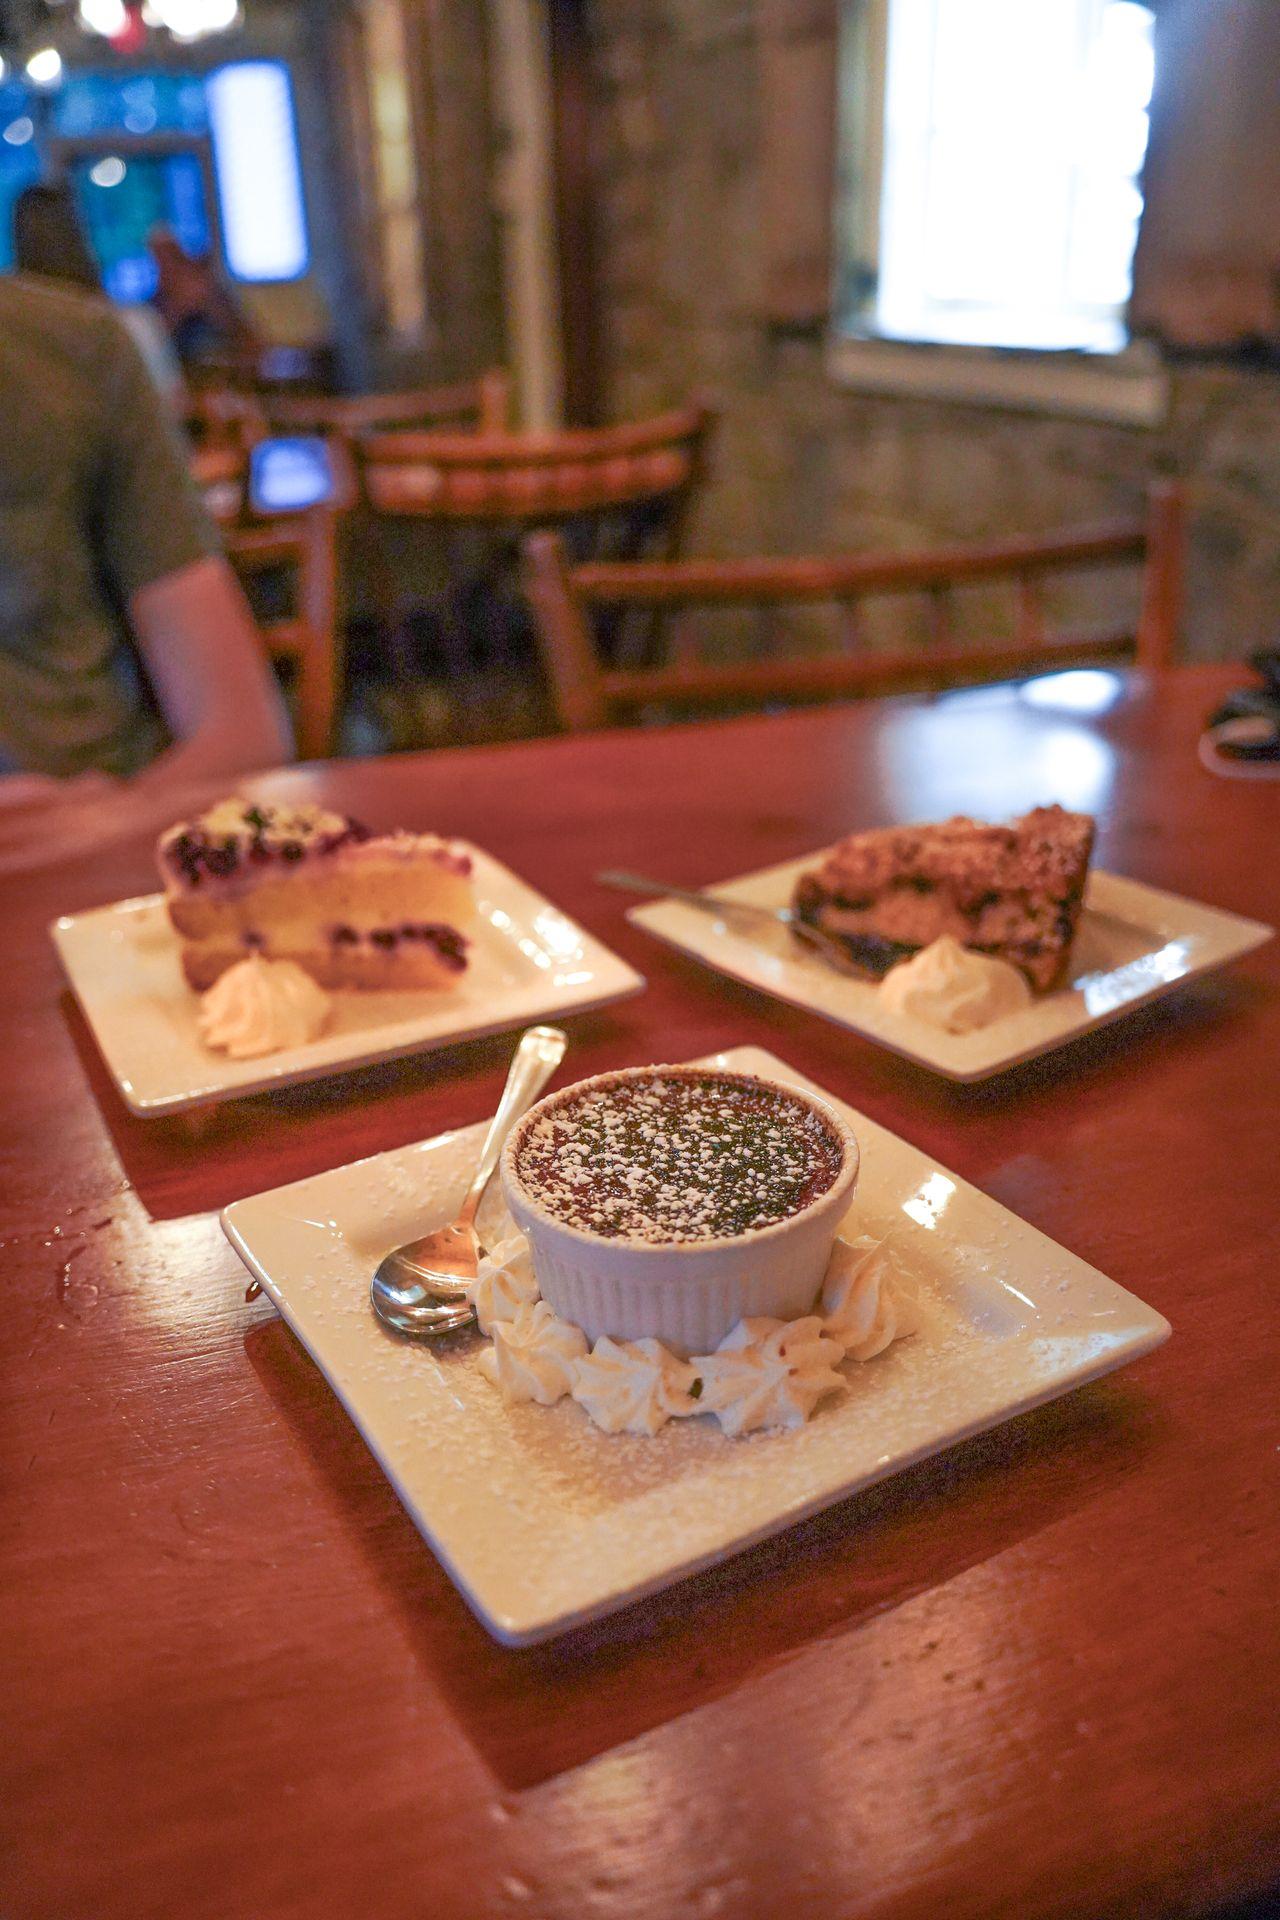 Creme Bruelee and two slices of cake from Duffy's Tavern.